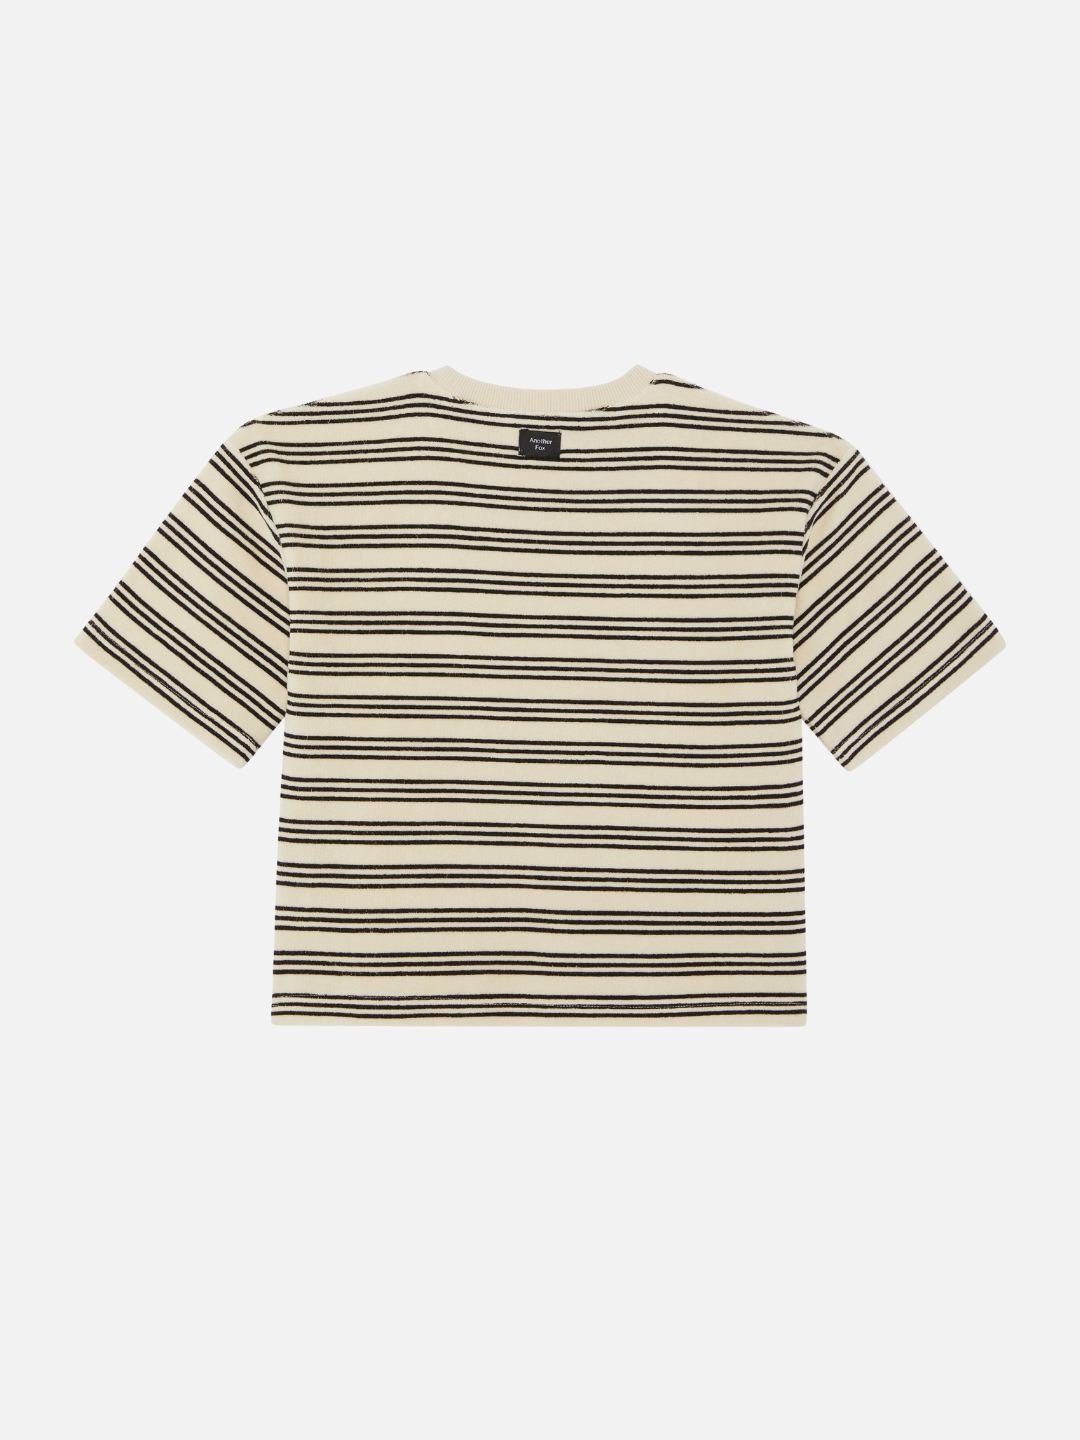 Stripe | A back view of the kid's tee in stripe print